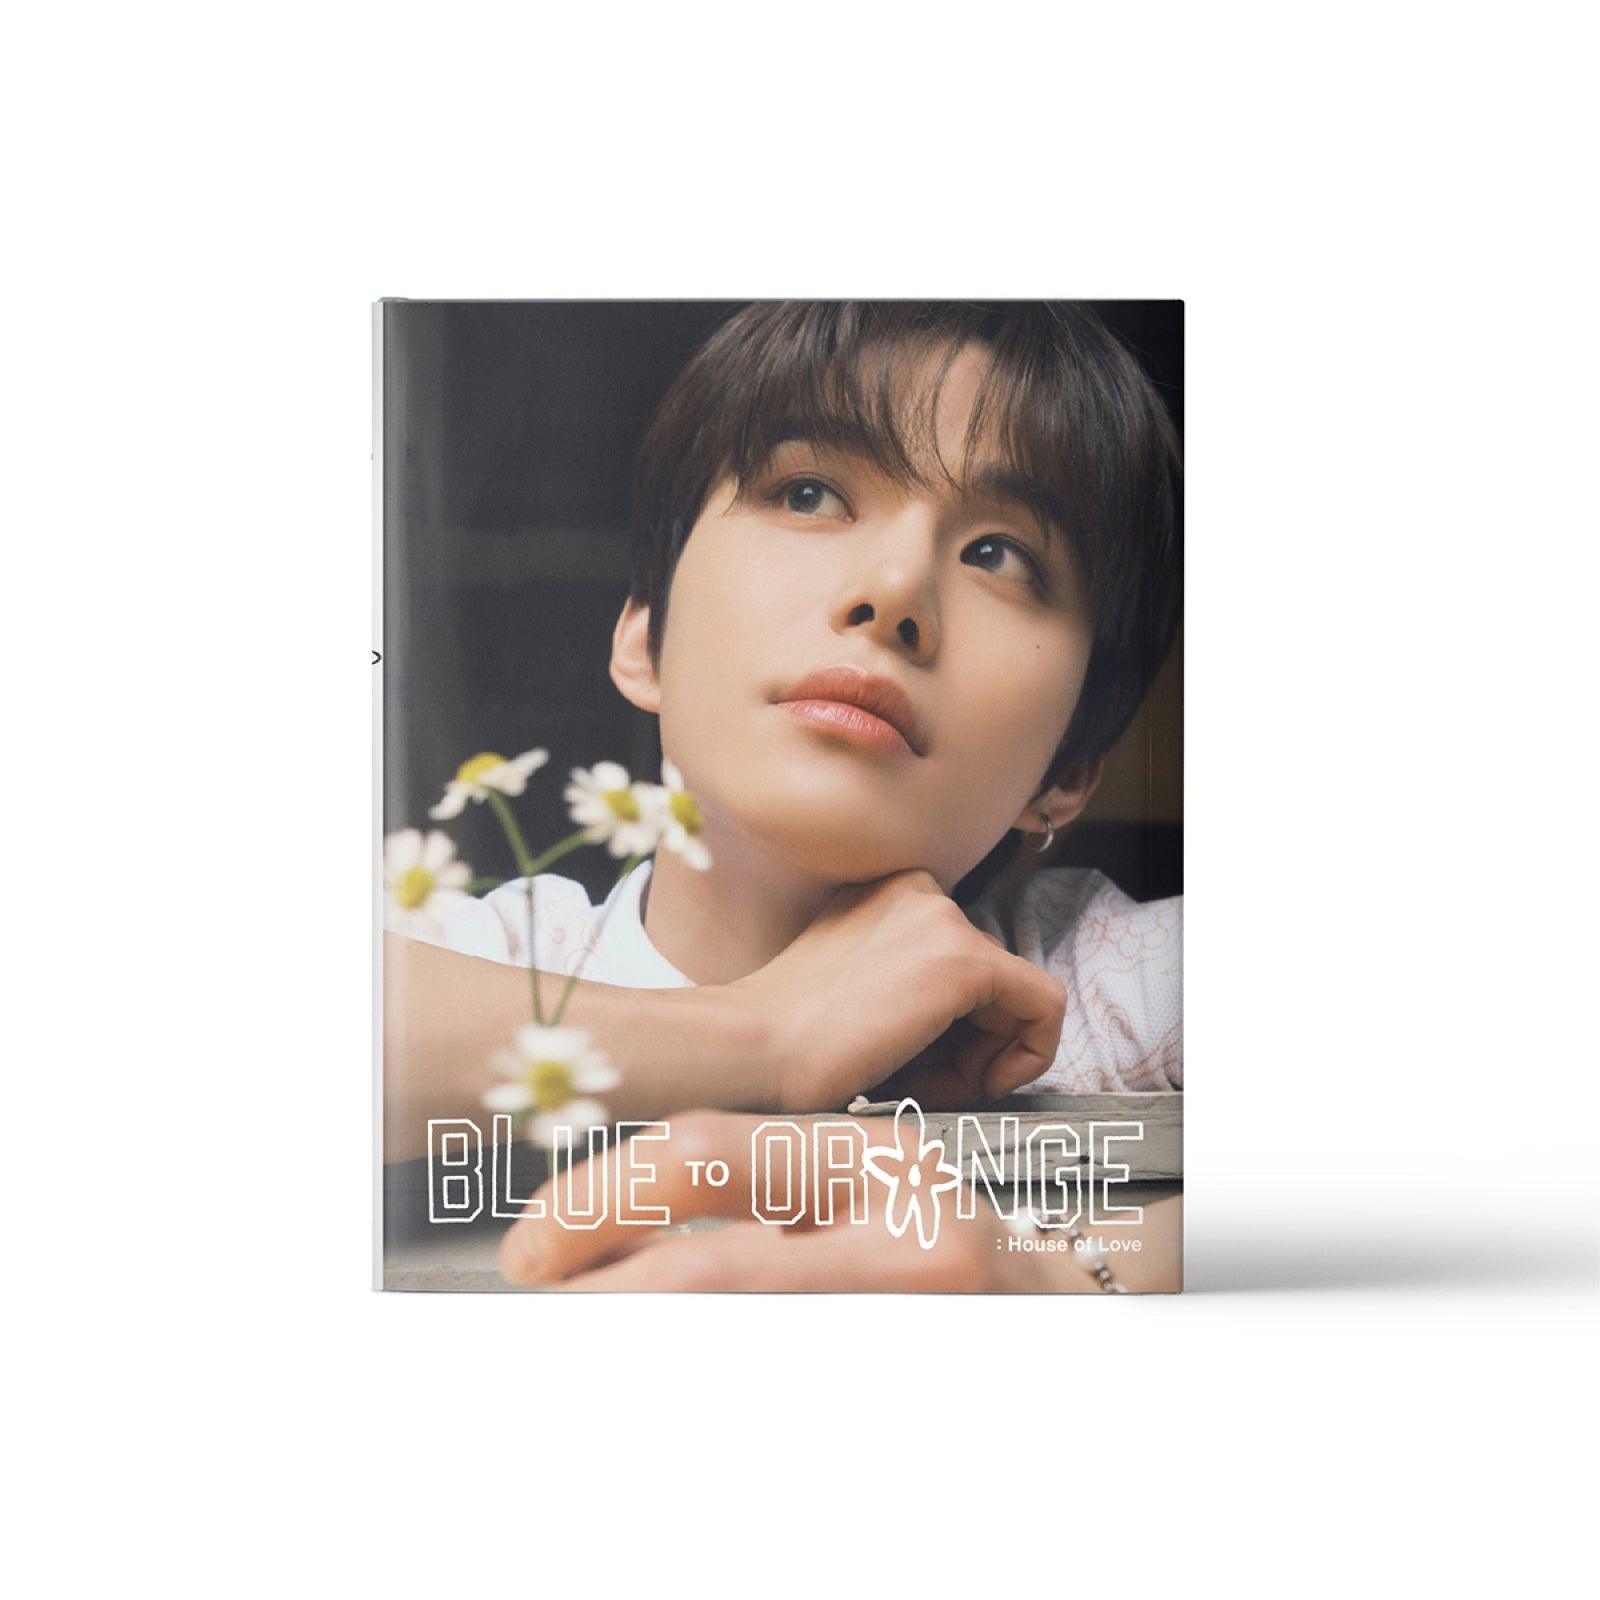 [Pre-order] NCT127 - PHOTOBOOK [BLUE TO ORANGE : House of Love] (JUNGWOO ver.) - Shopping Around the World with Goodsnjoy